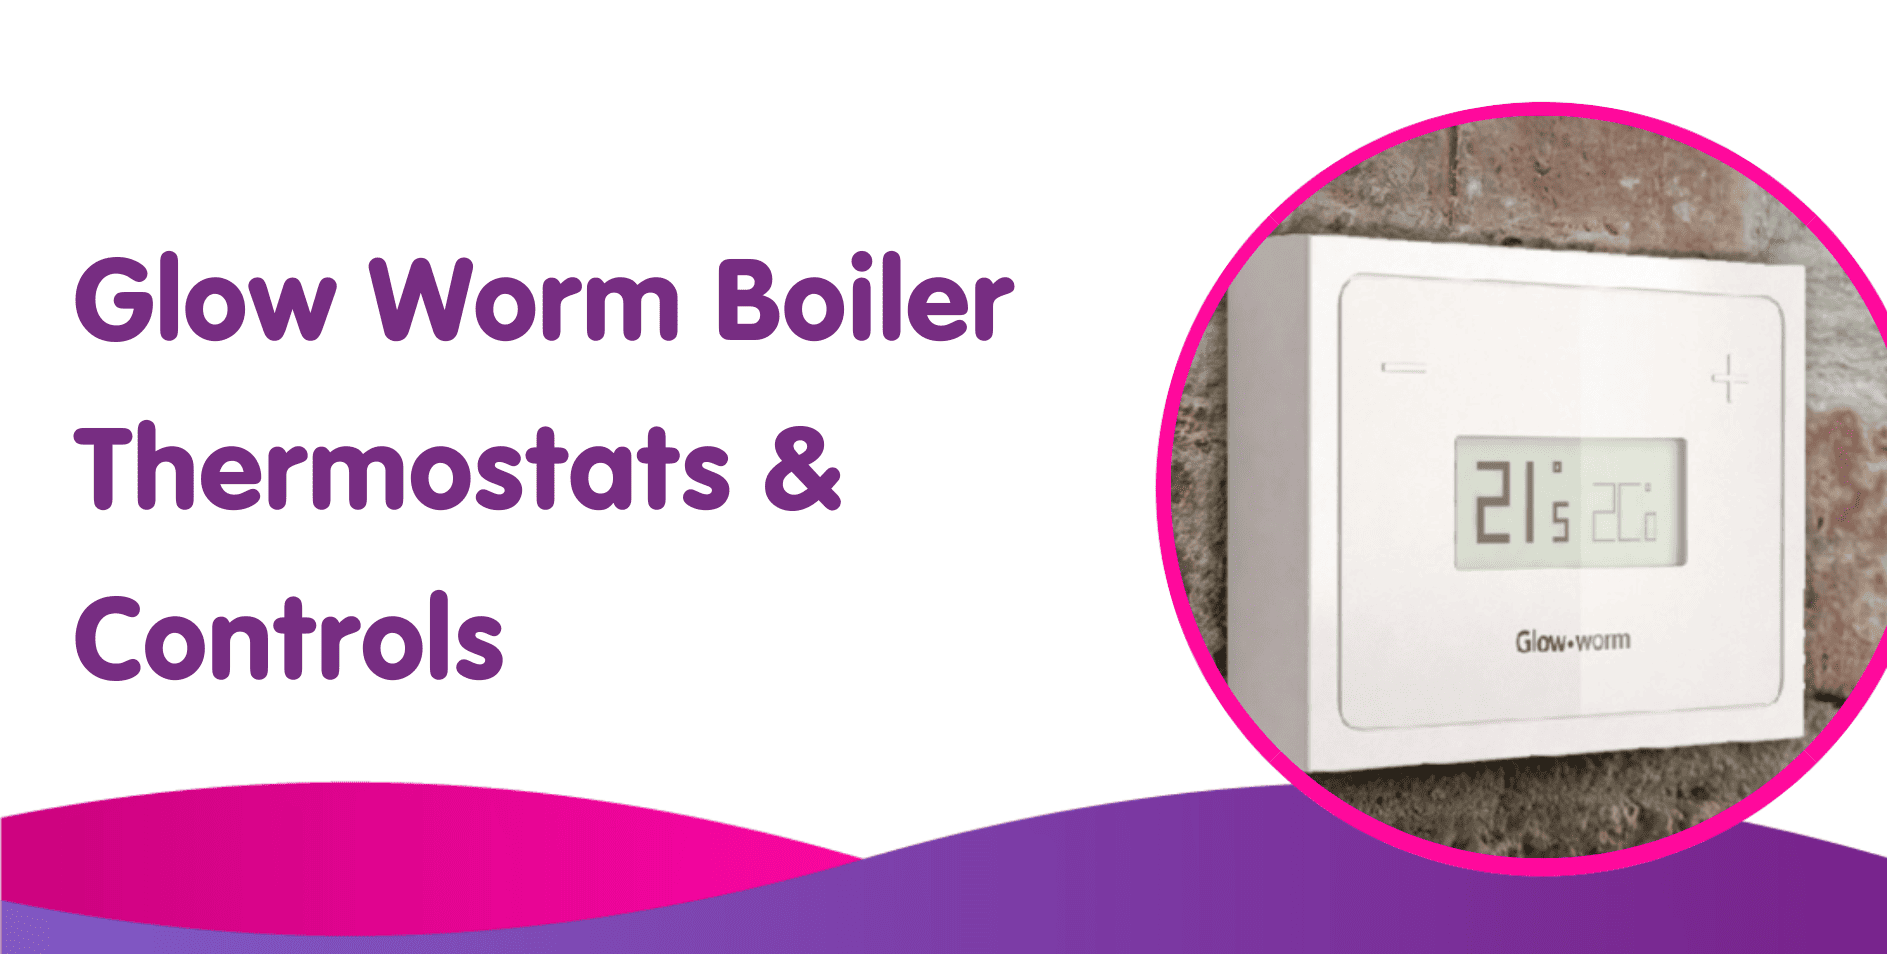 Glow Worm Boiler Thermostats & Controls